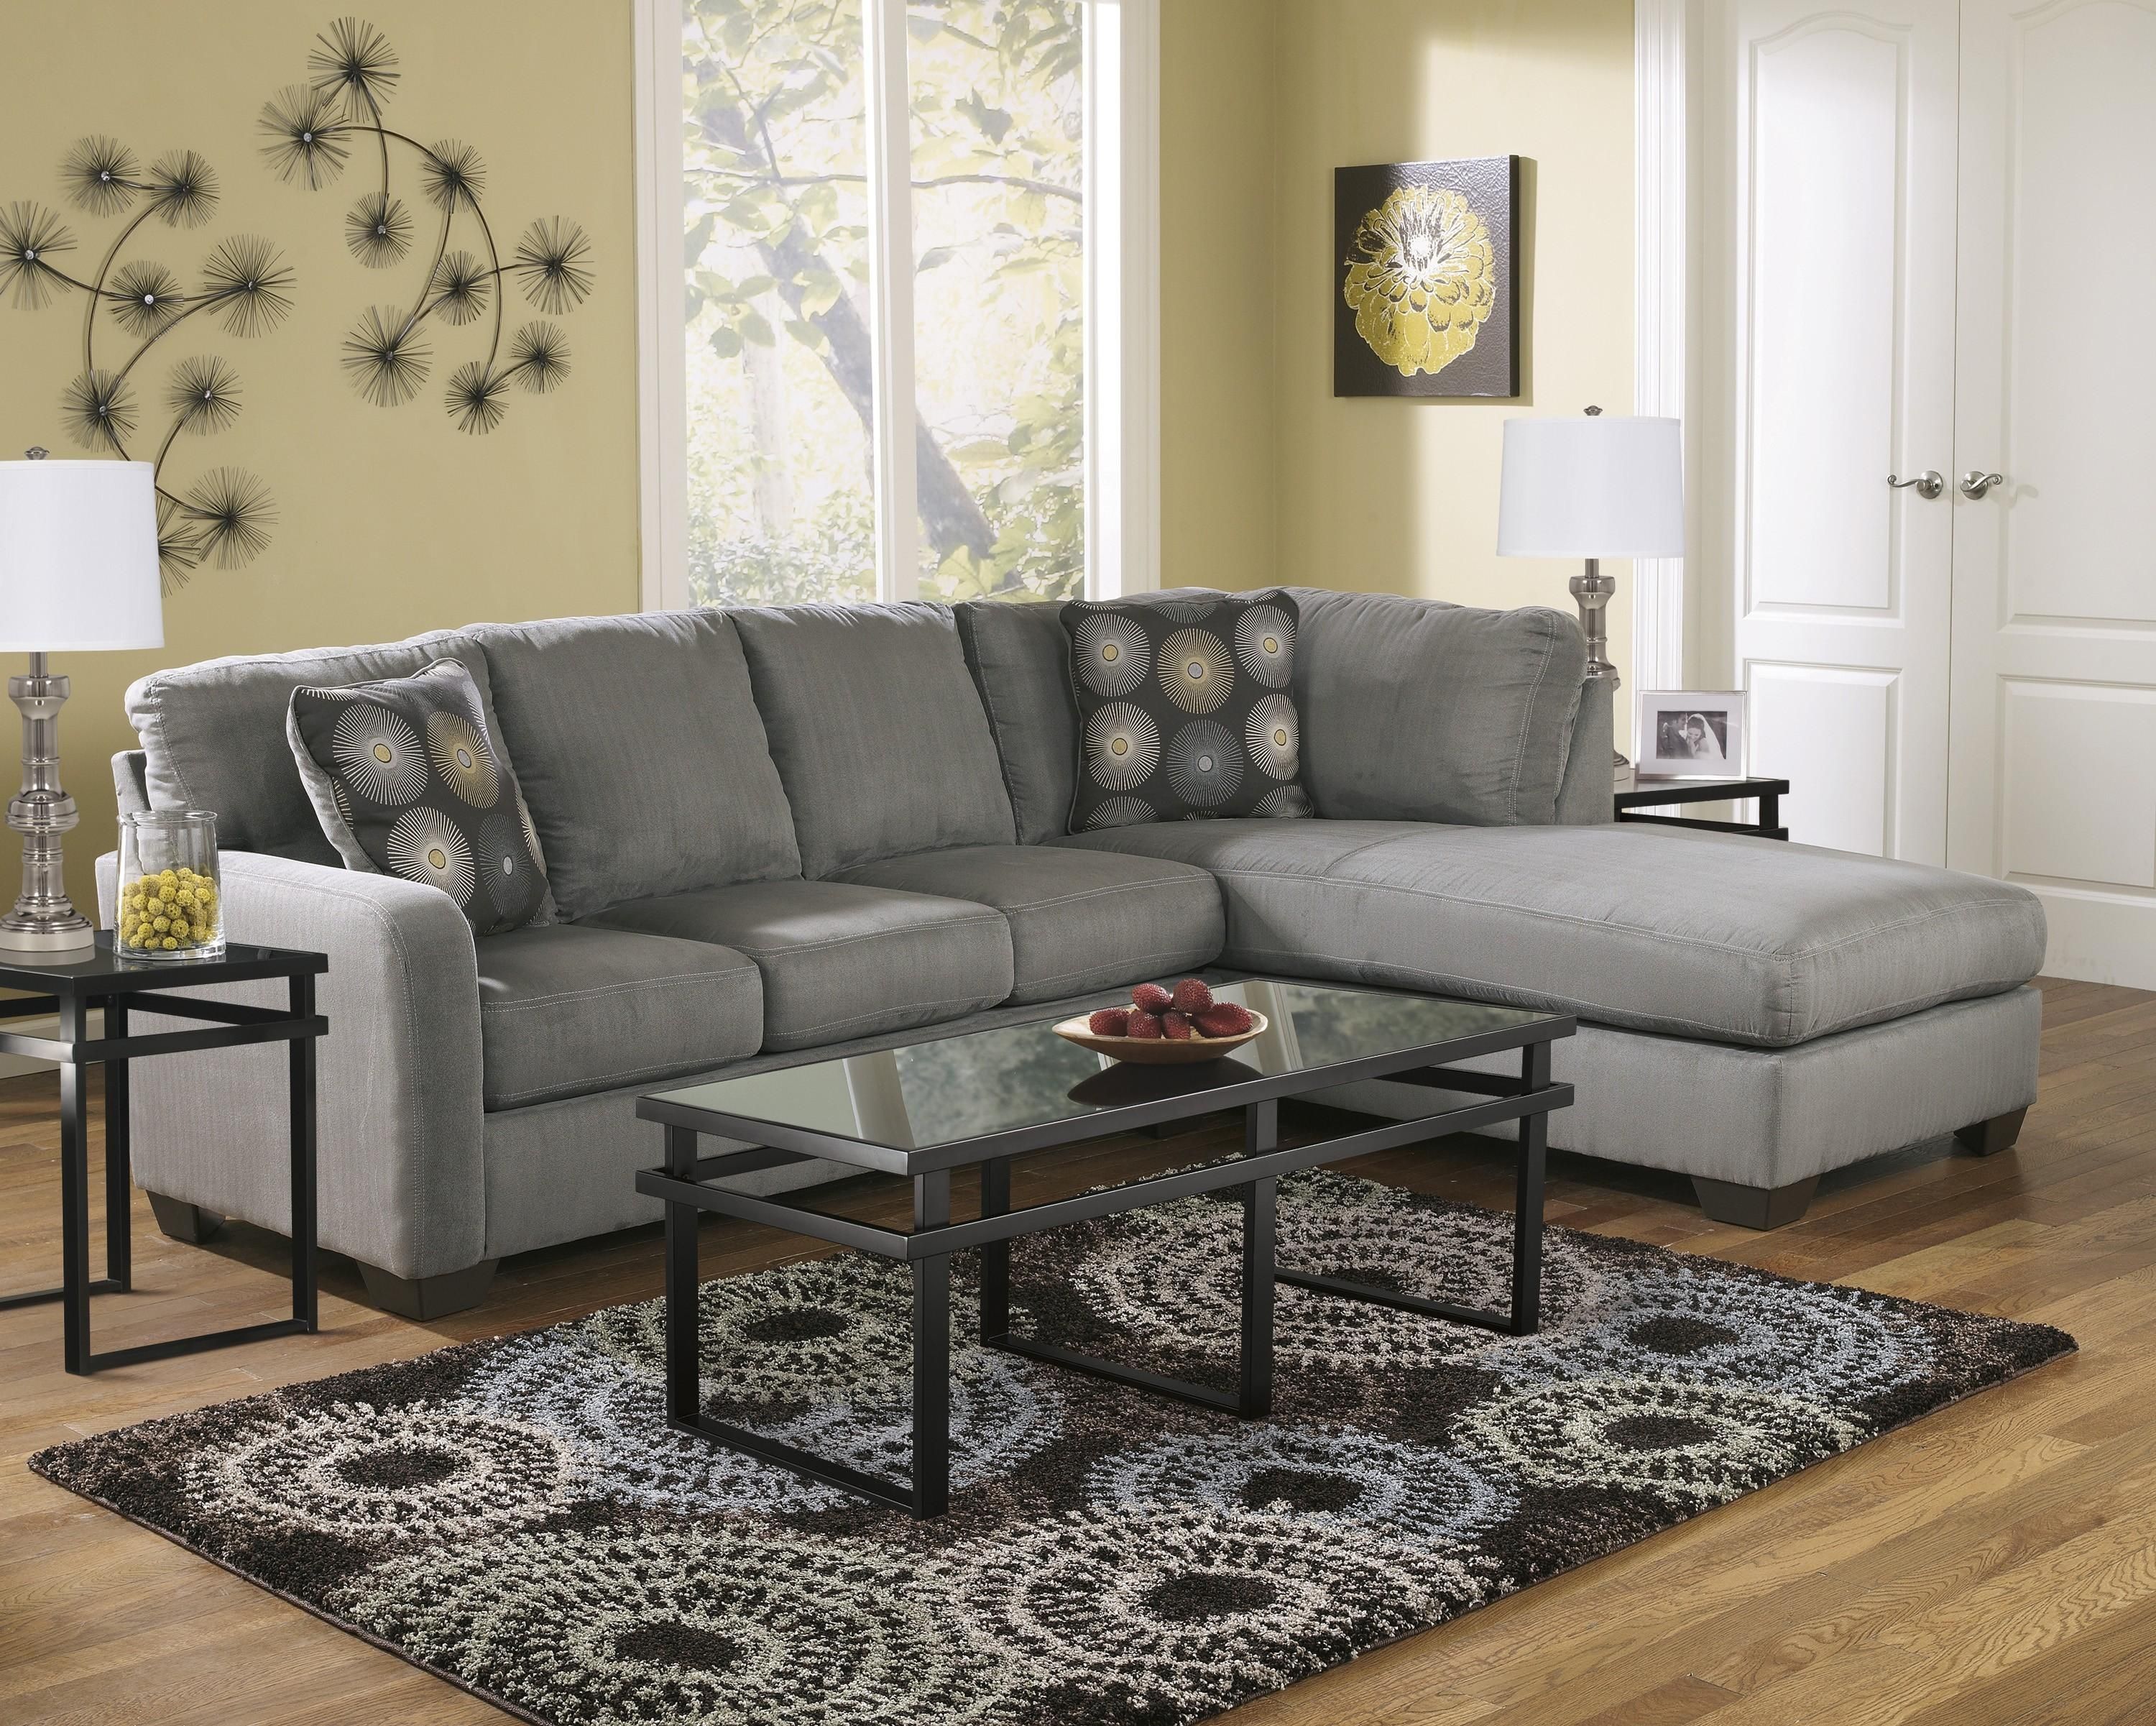 Zella Charcoal 2 Piece Sectional Sofa For $545.00 – Furnitureusa Intended For Small 2 Piece Sectional (Photo 2 of 20)